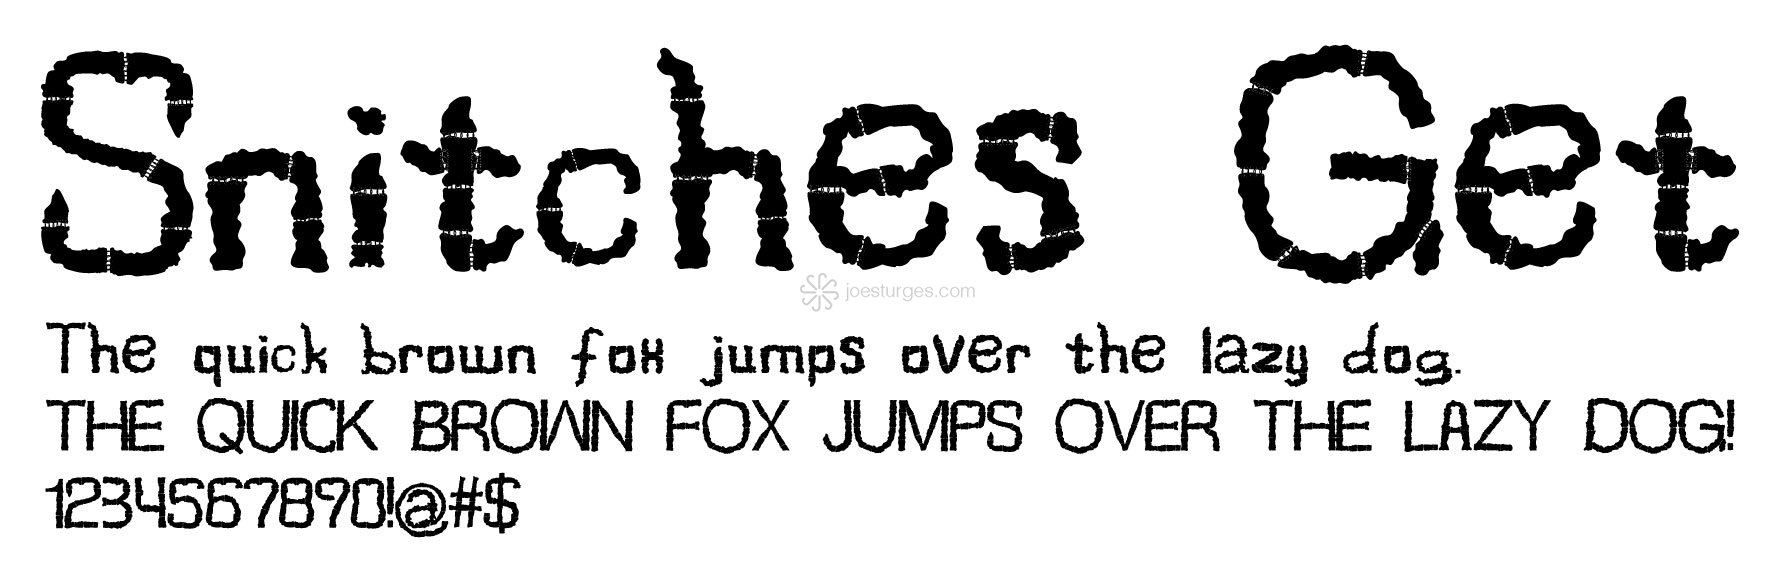 Snitches Get, A unique custom font for large scale type.